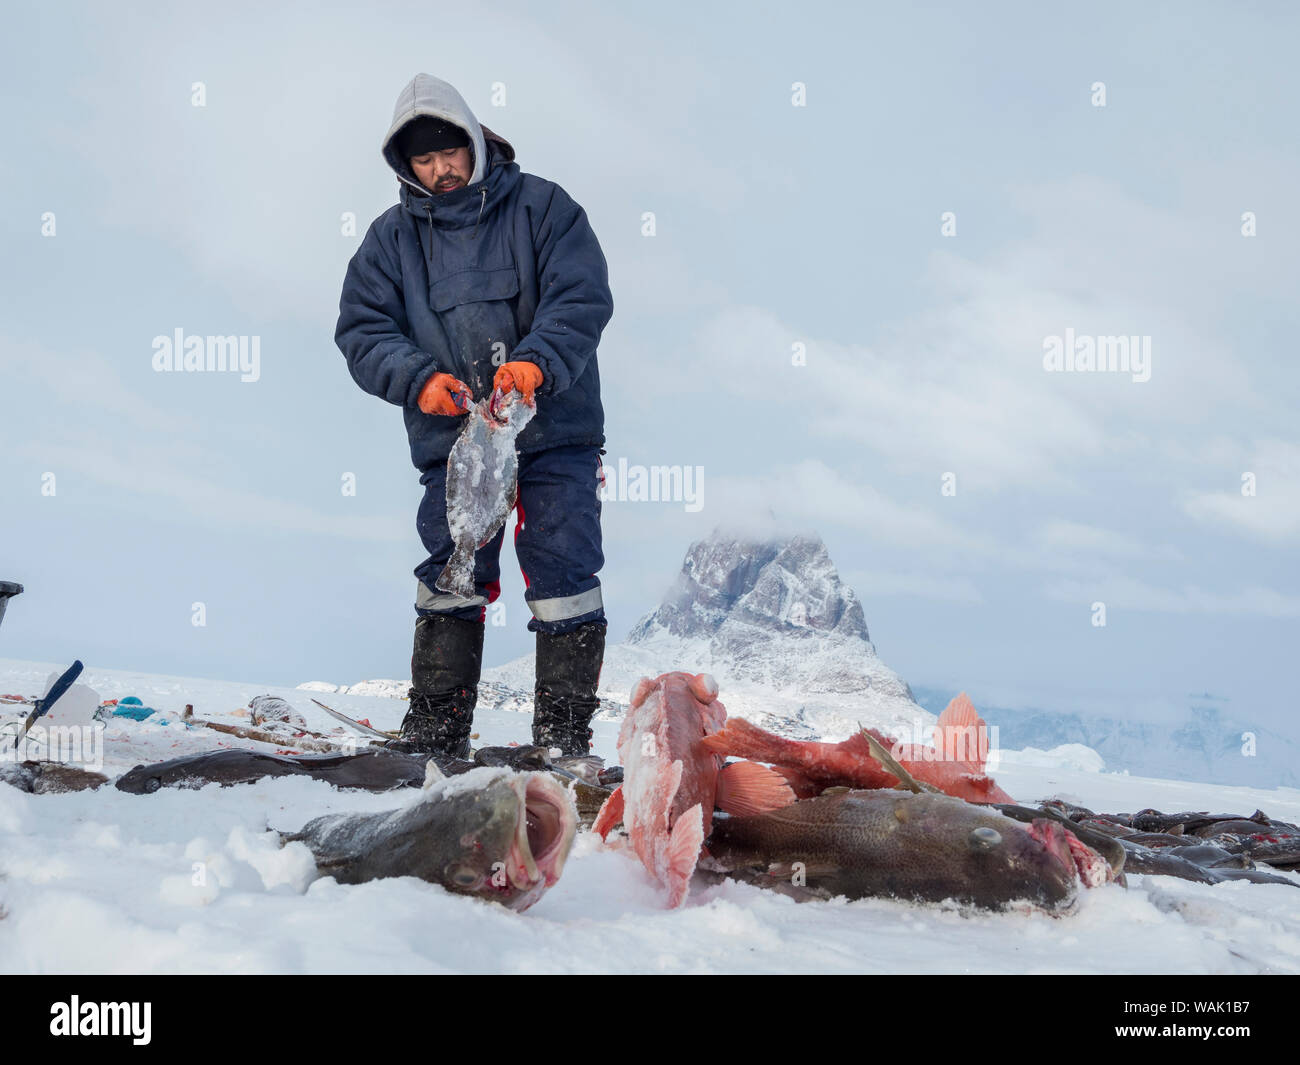 Fishermen in the Uummannaq Fjord System, Greenland. The fjords are frozen during winter, the fishermen use sleds to drive to holes in the ice. They lower lines with bait down to 1000 meters. (Editorial Use Only) Stock Photo